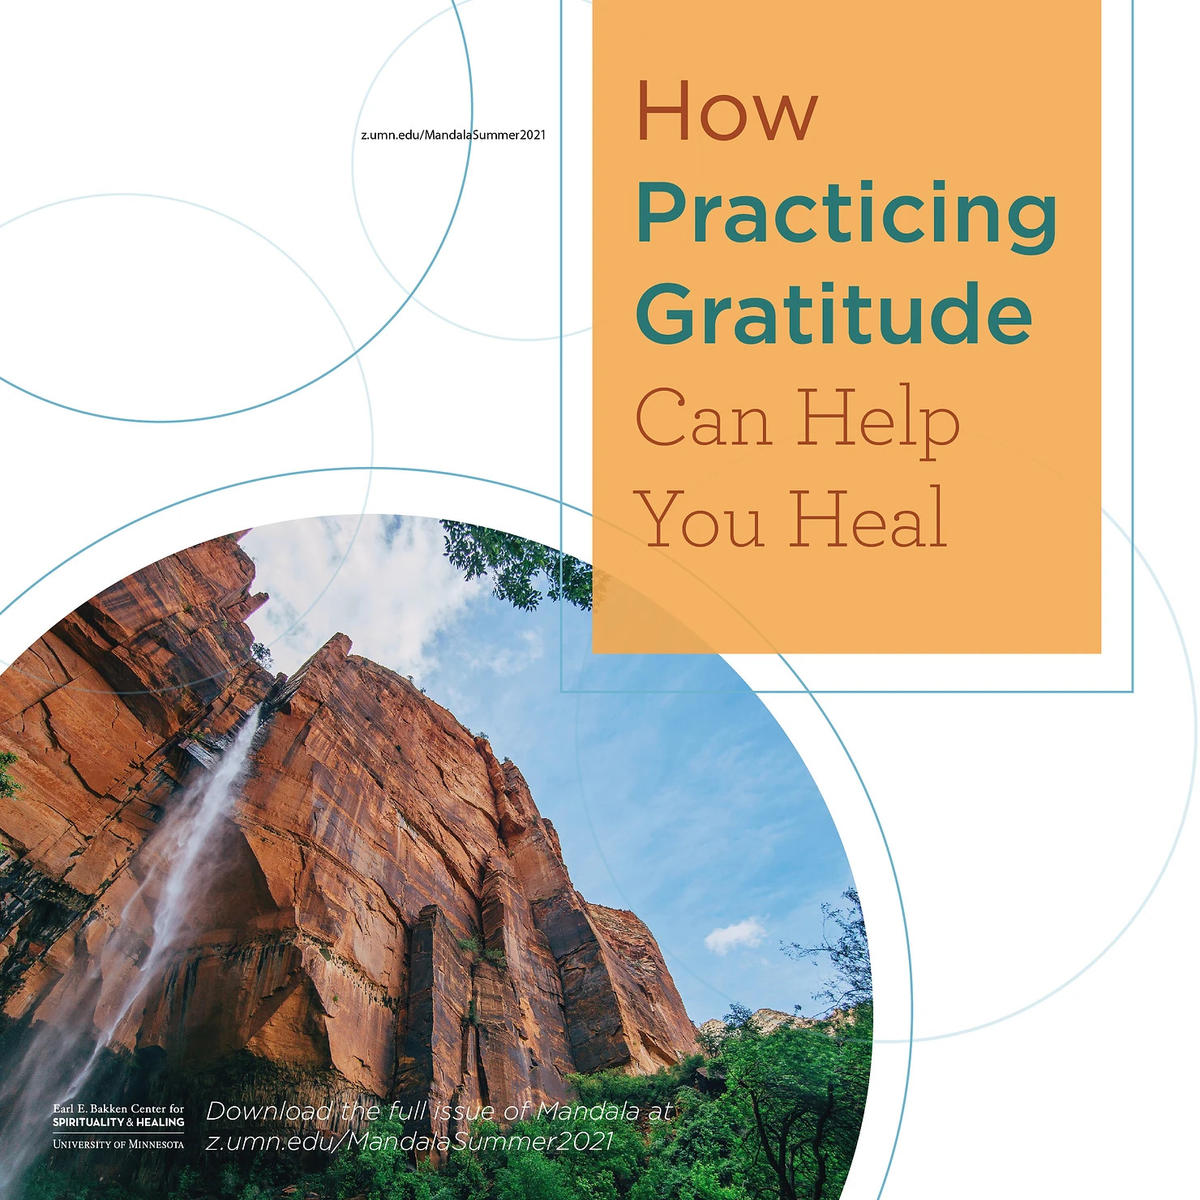 "how practicing gratitude can help you heal" text with a mountain in the background